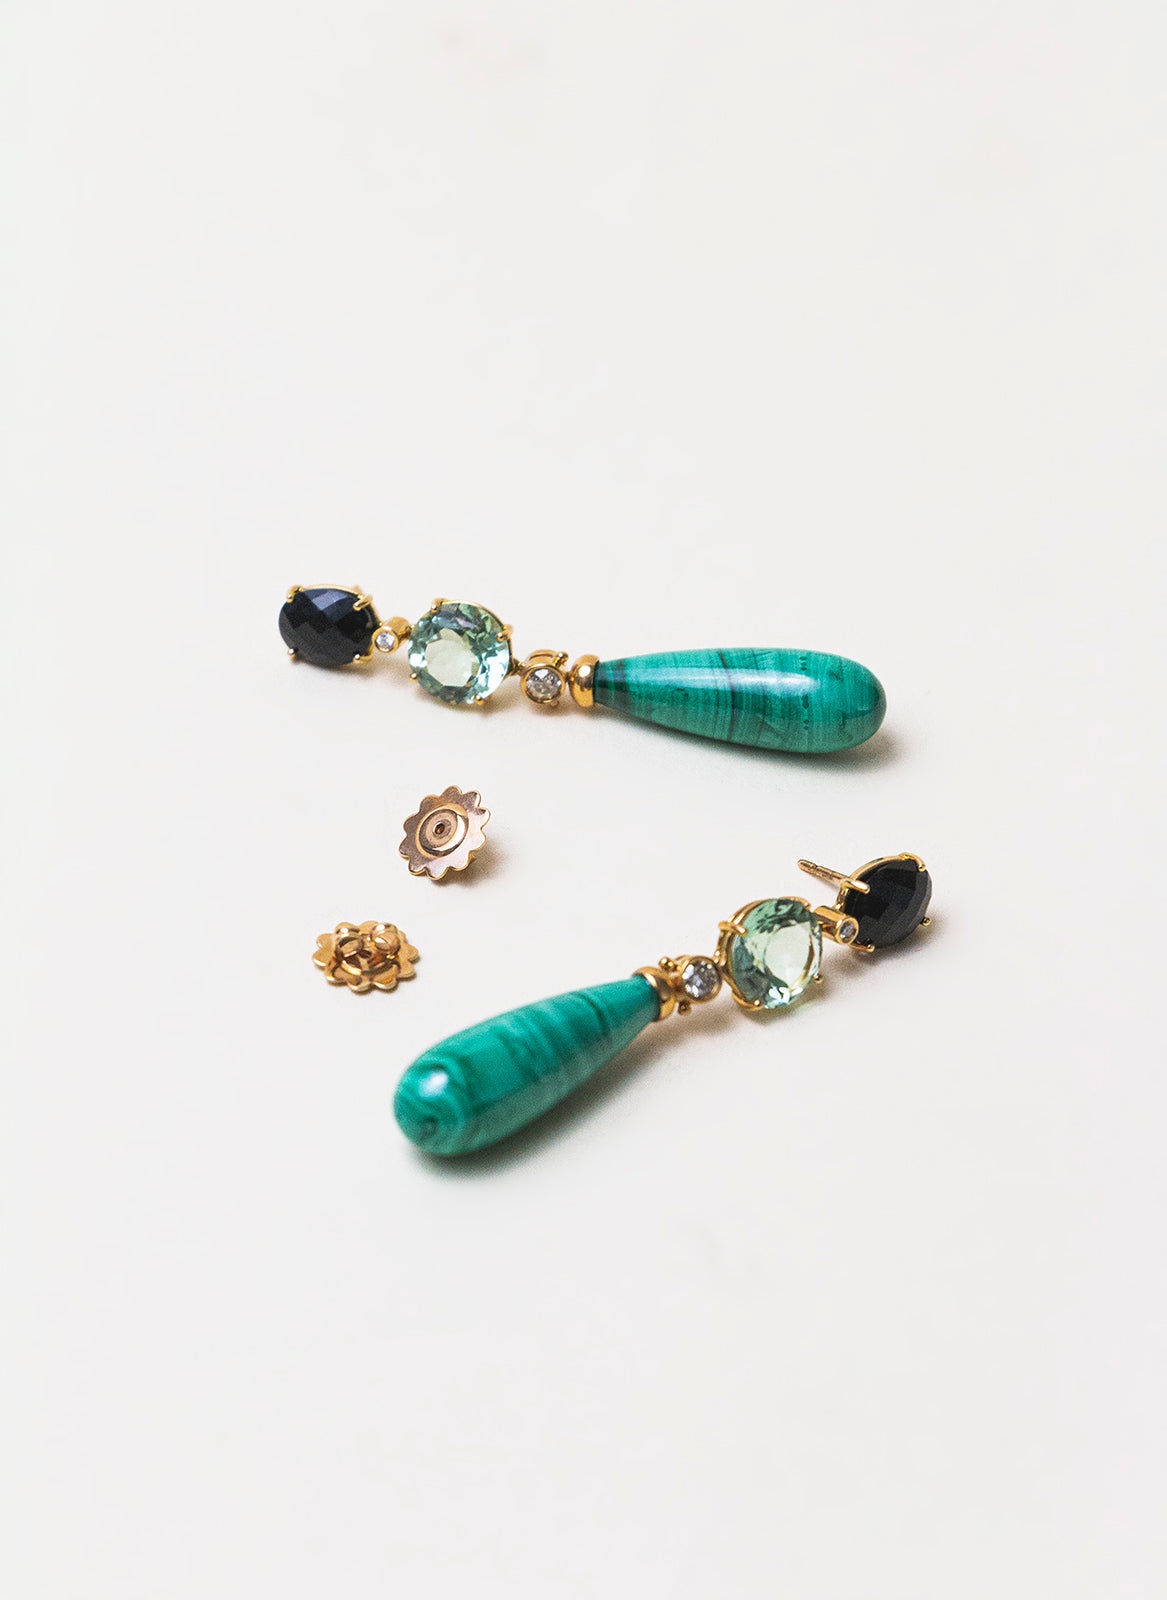 Rose Gold Earrings with Malachite, Onyx and Diamonds